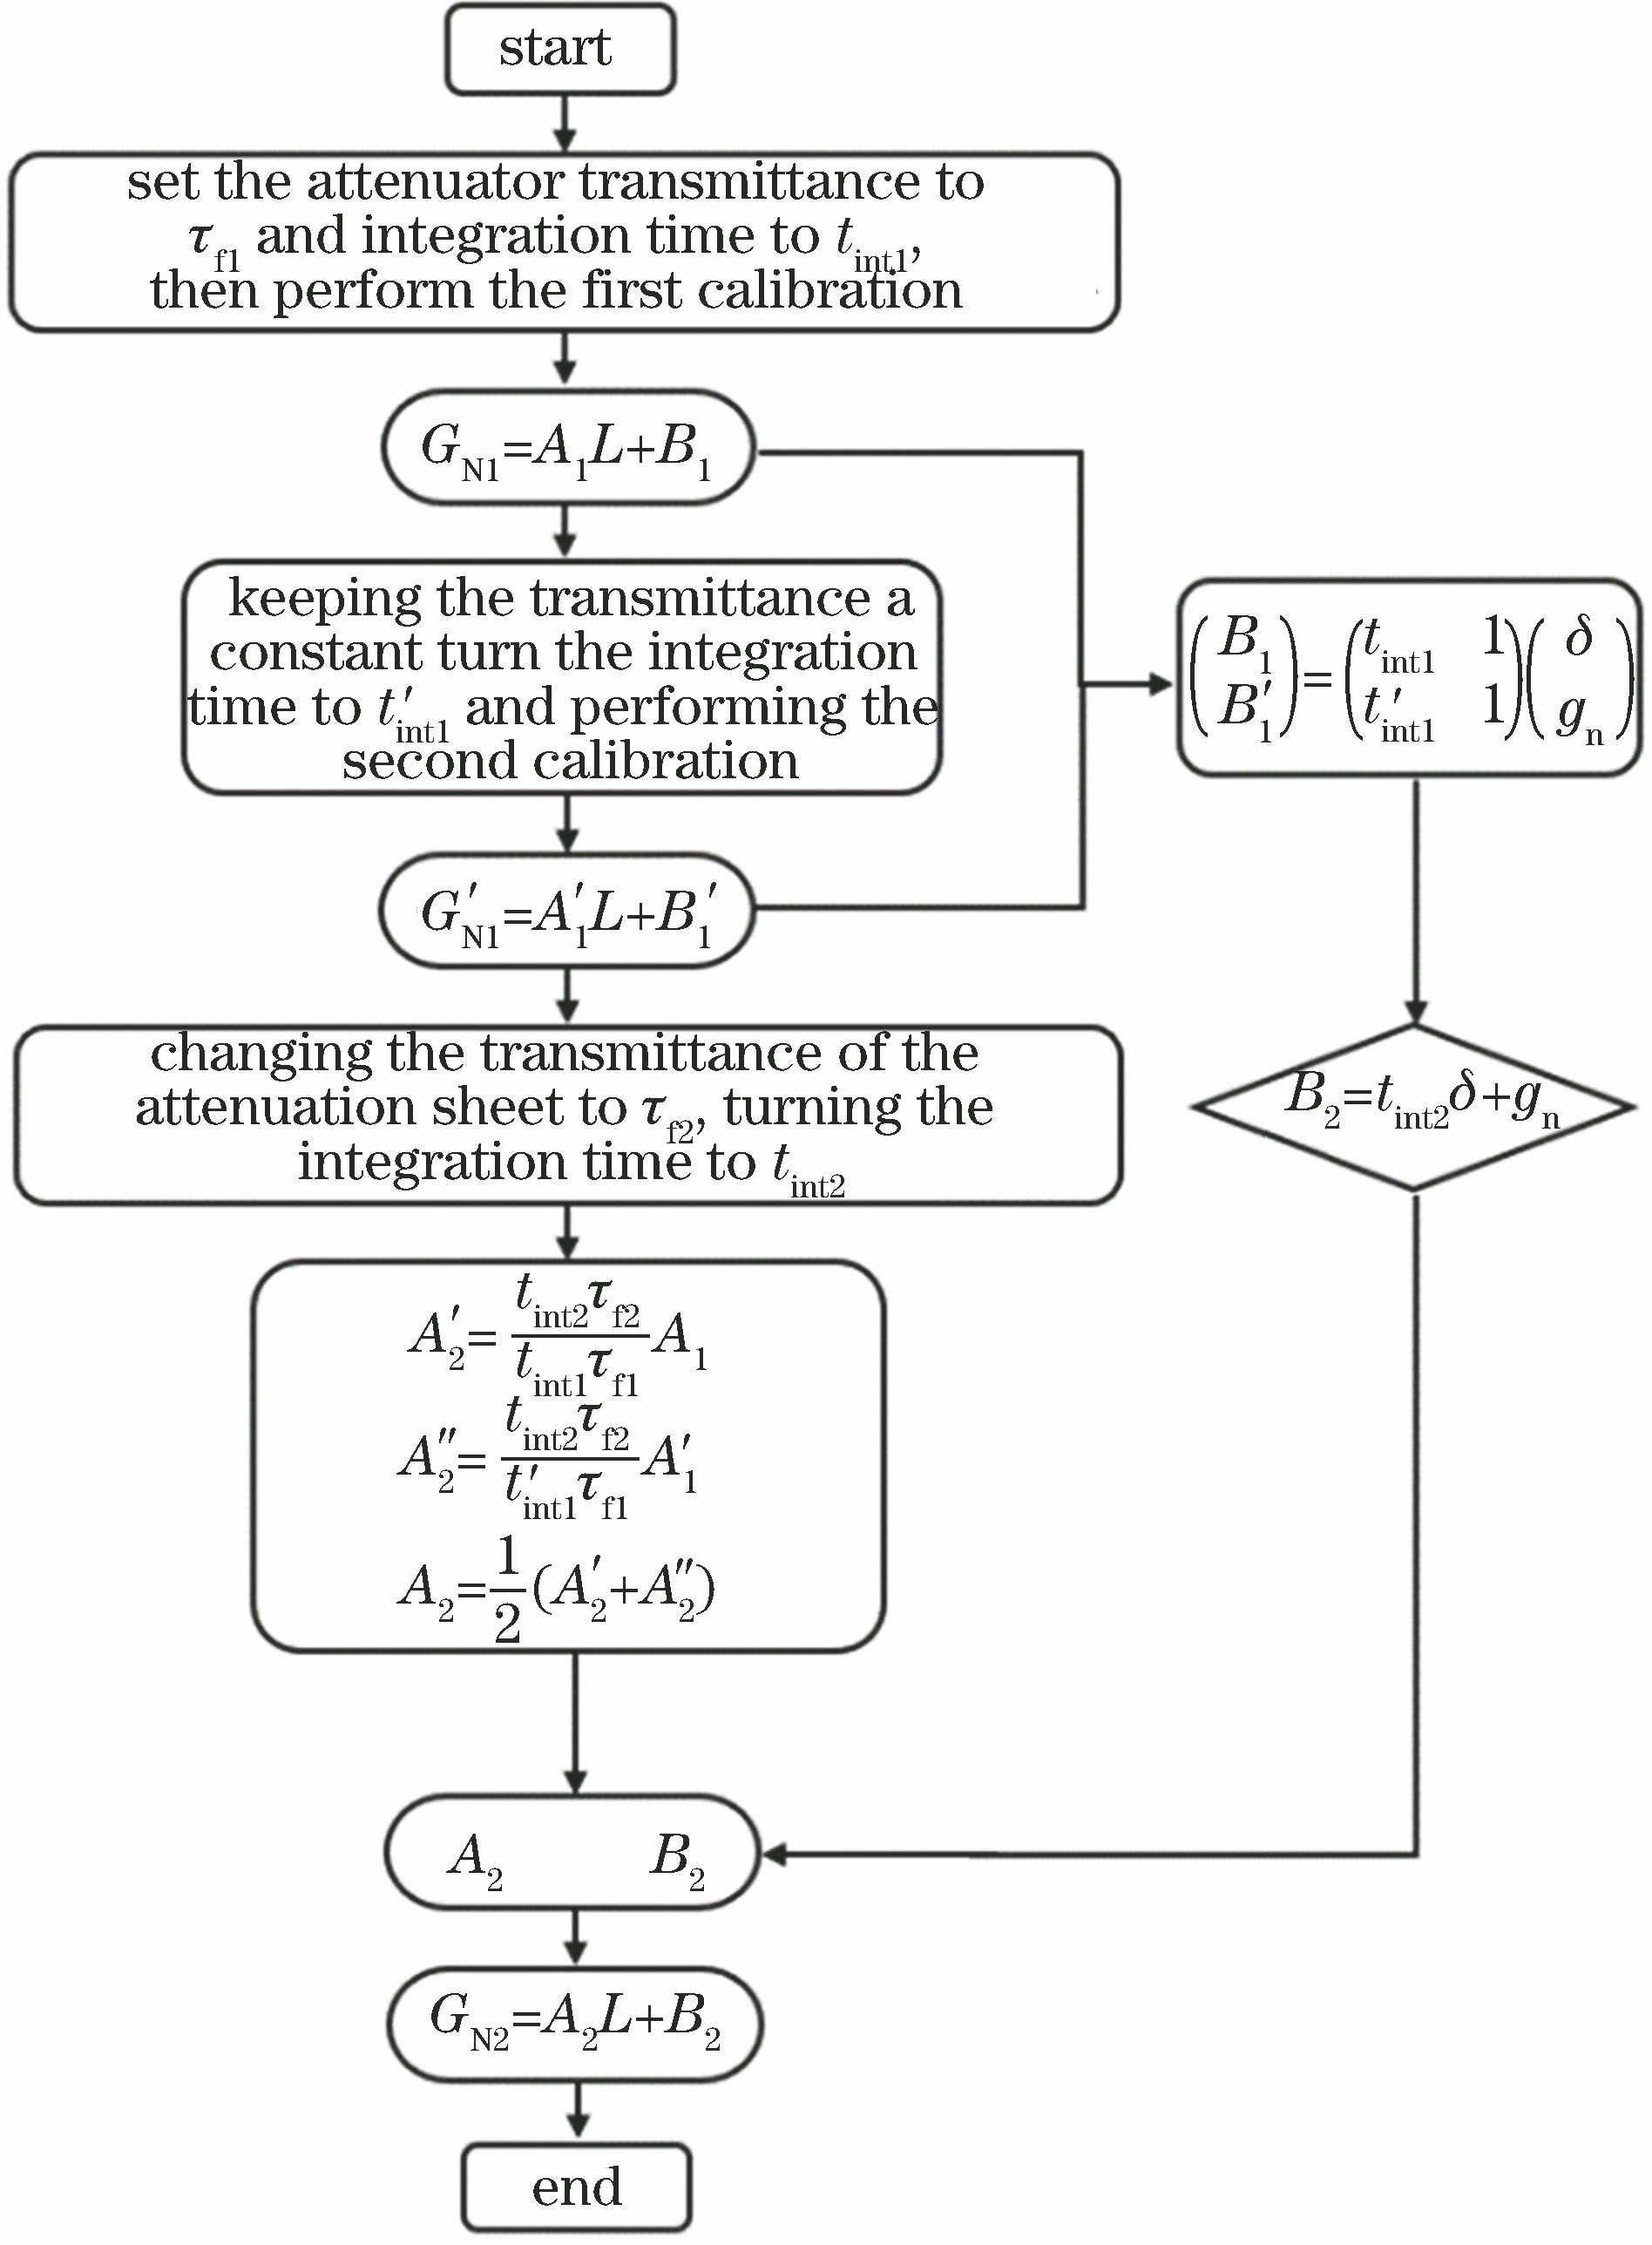 Flow chart of simplified calibration method